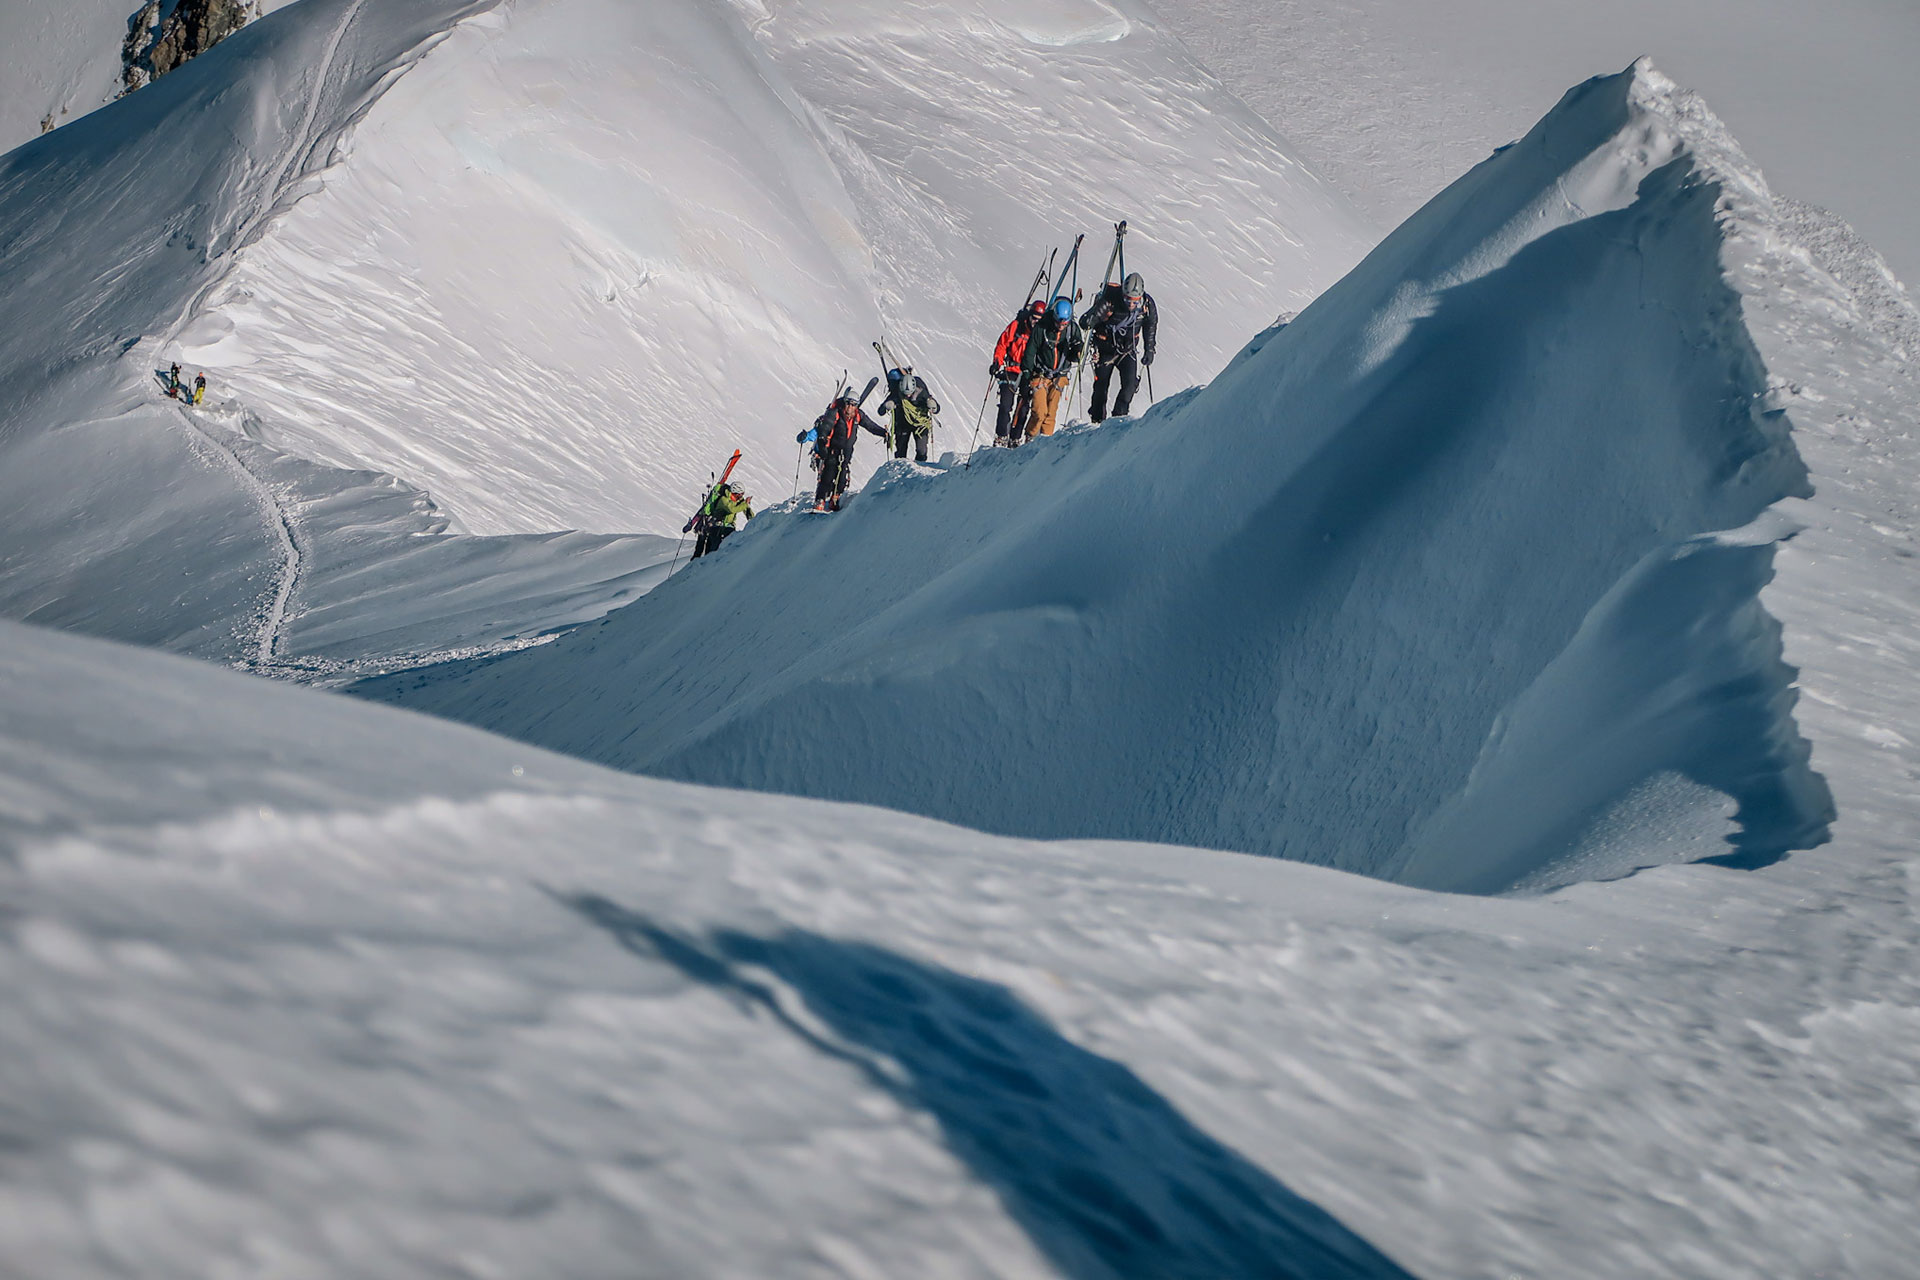 Crossing the ridge during a ski tour ascent of Mont Blanc with a guide.